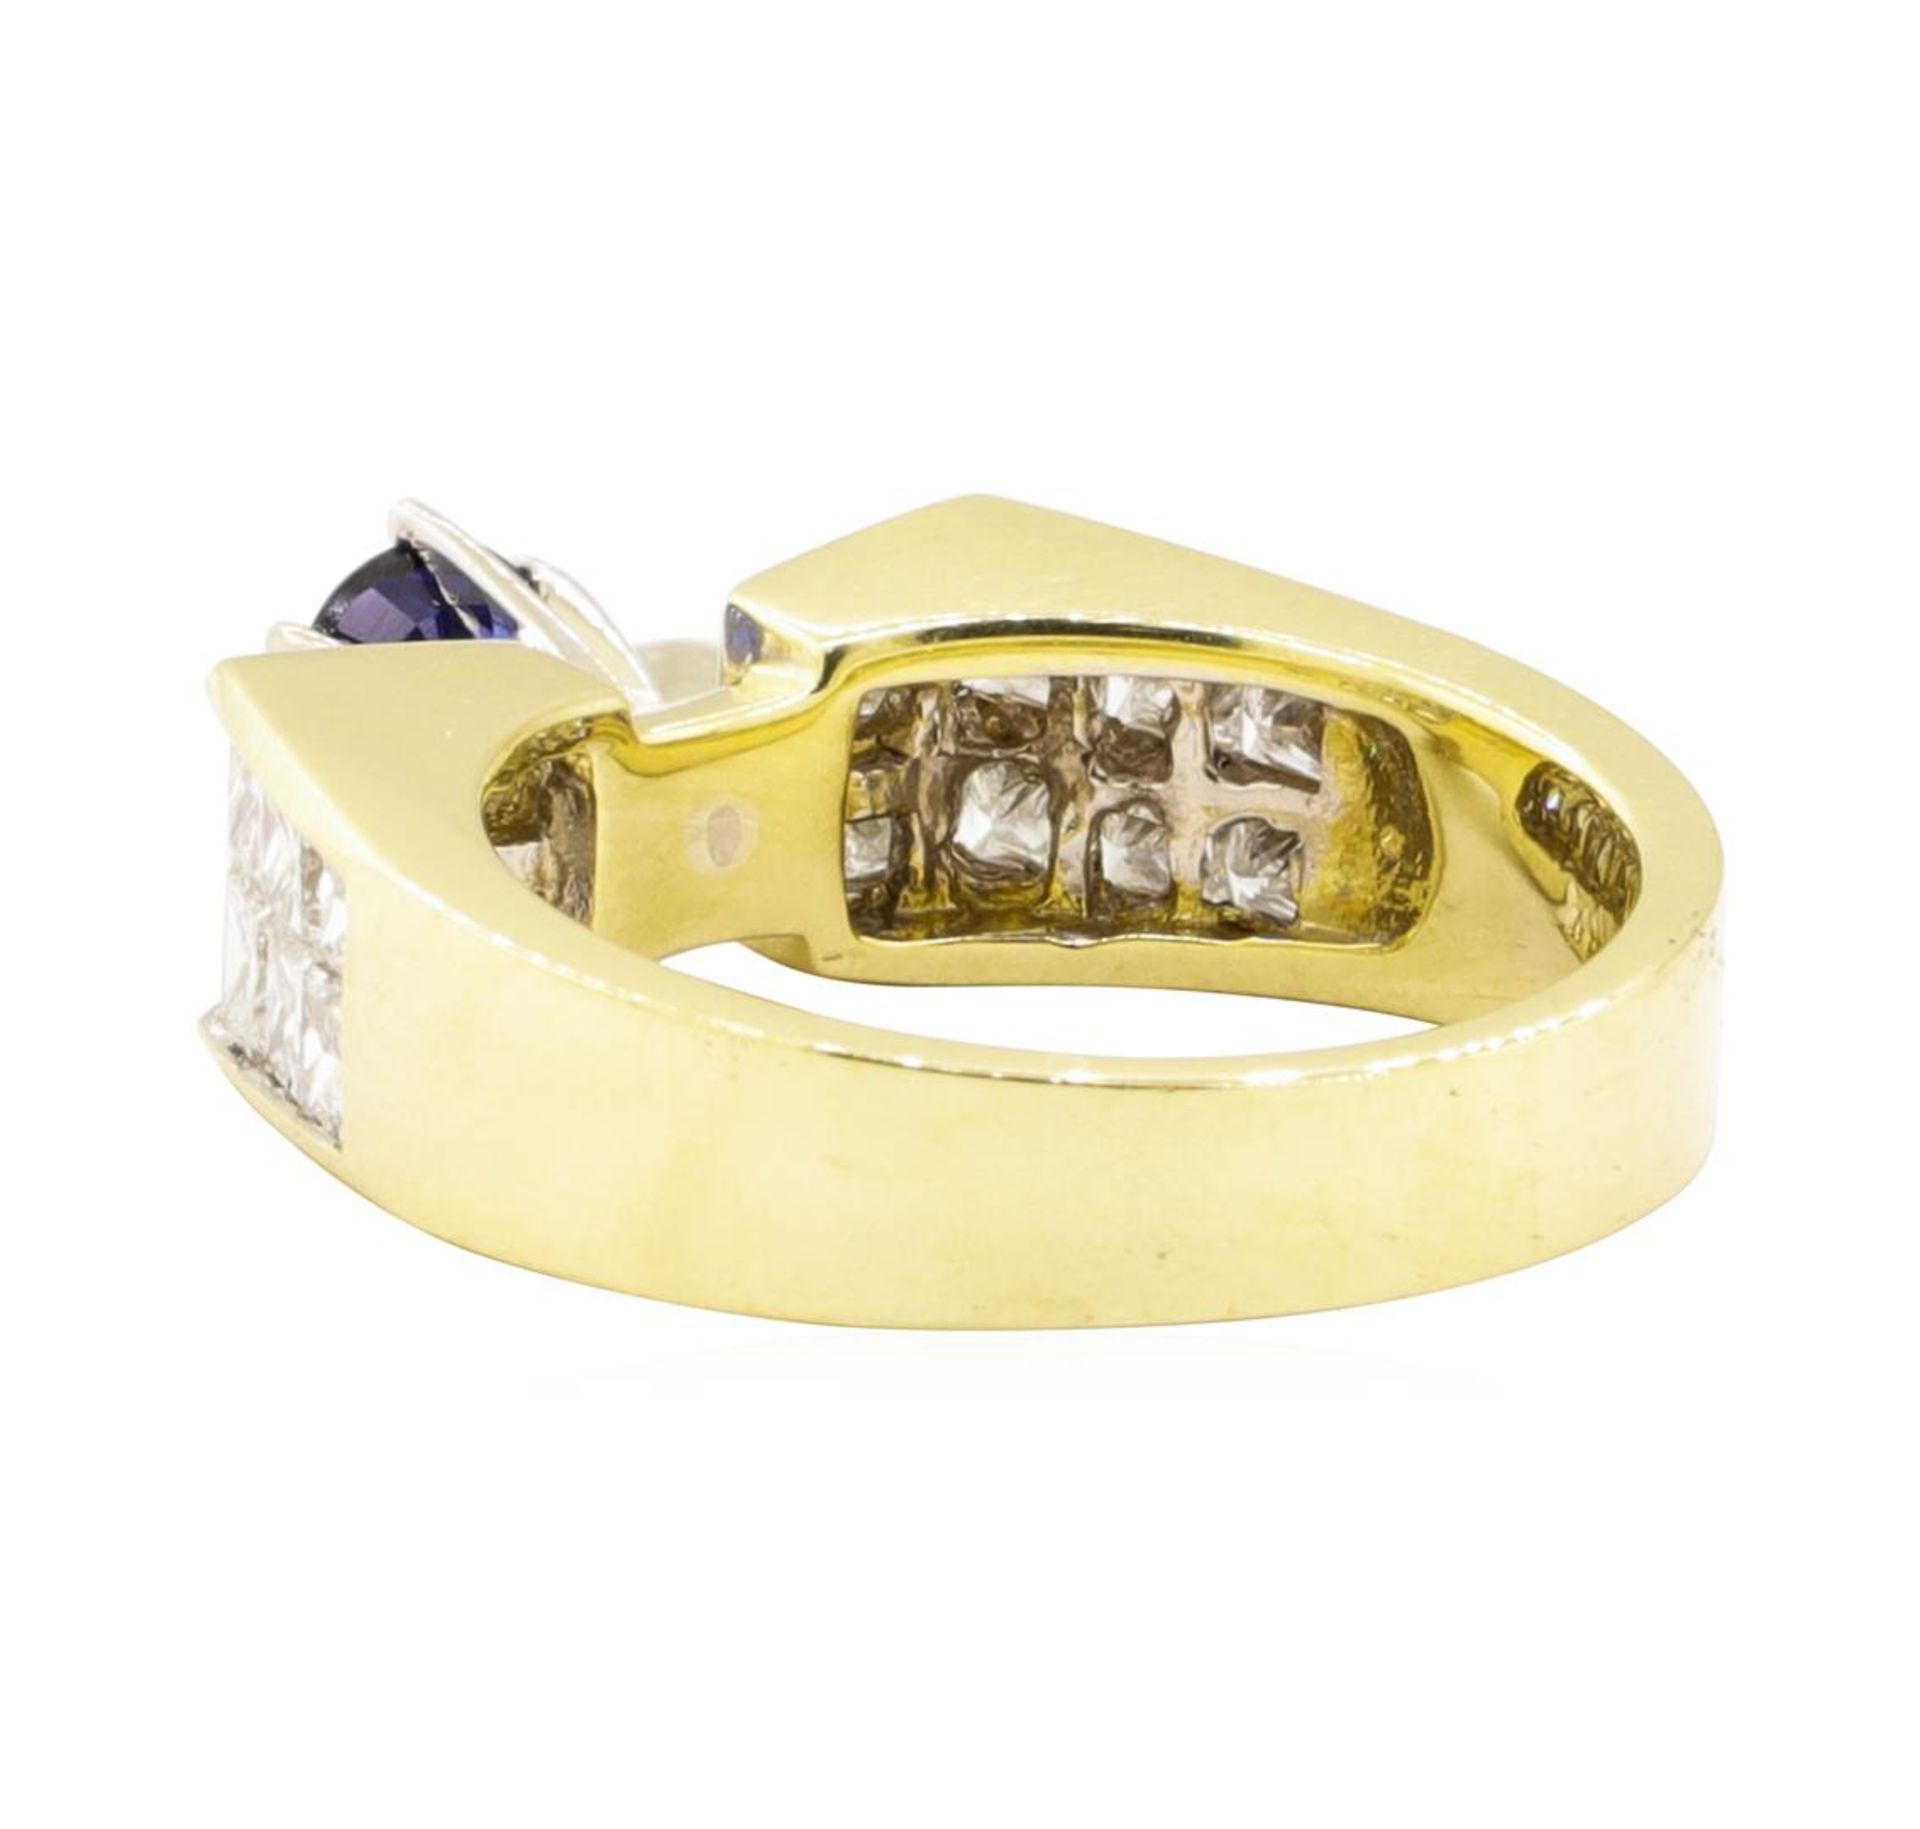 2.45 ctw Blue Sapphire And Diamond Ring - 18KT Yellow Gold - Image 3 of 5